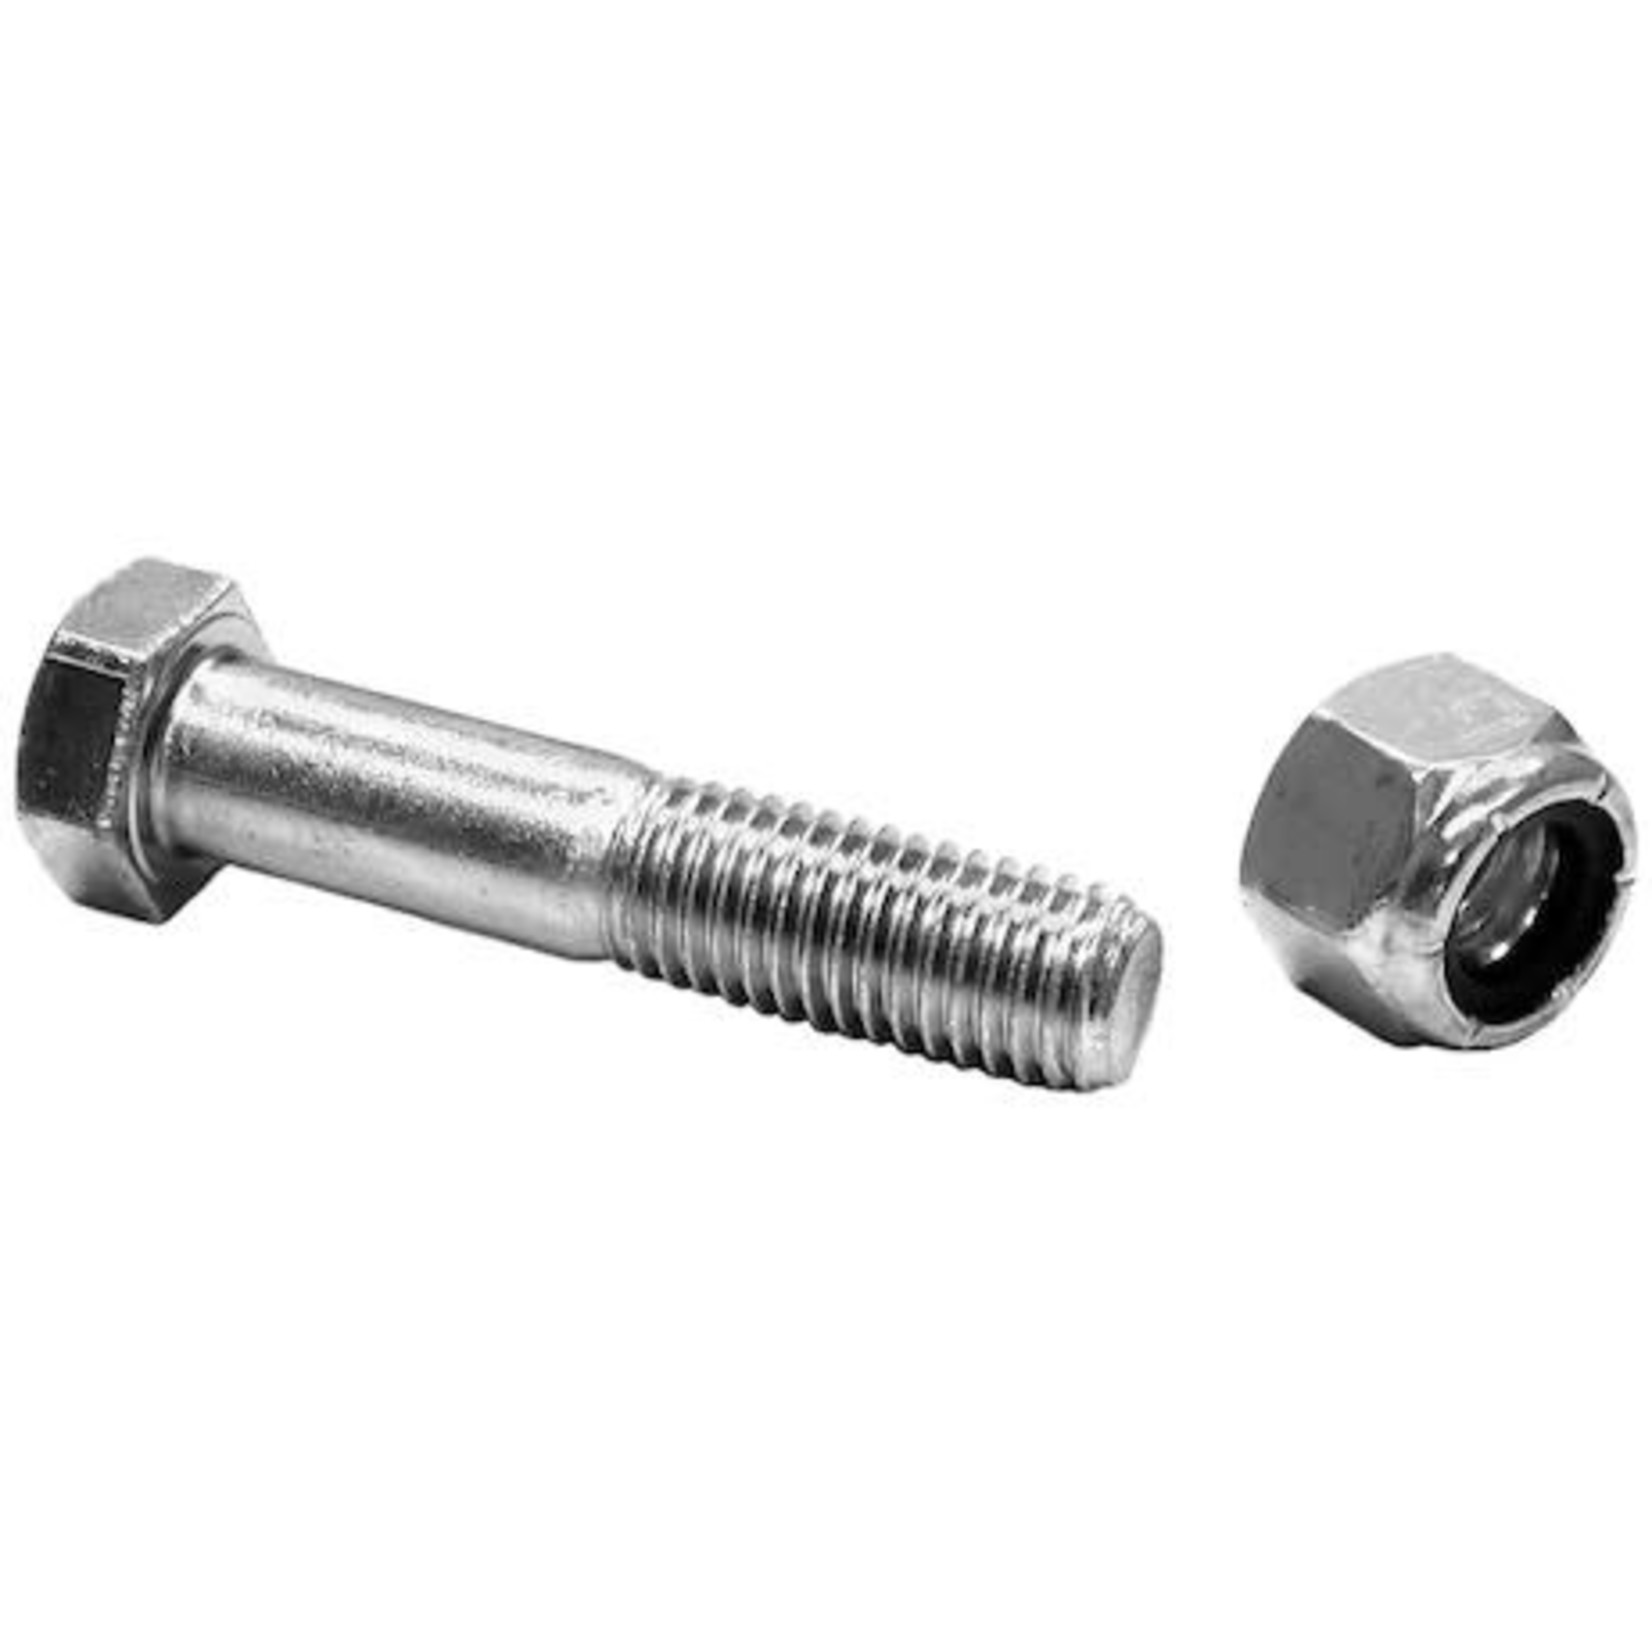 Buyers Products Company SAM King Bolt And Locknut Assembly 5/8-11 Thread-Replaces Meyer #09122